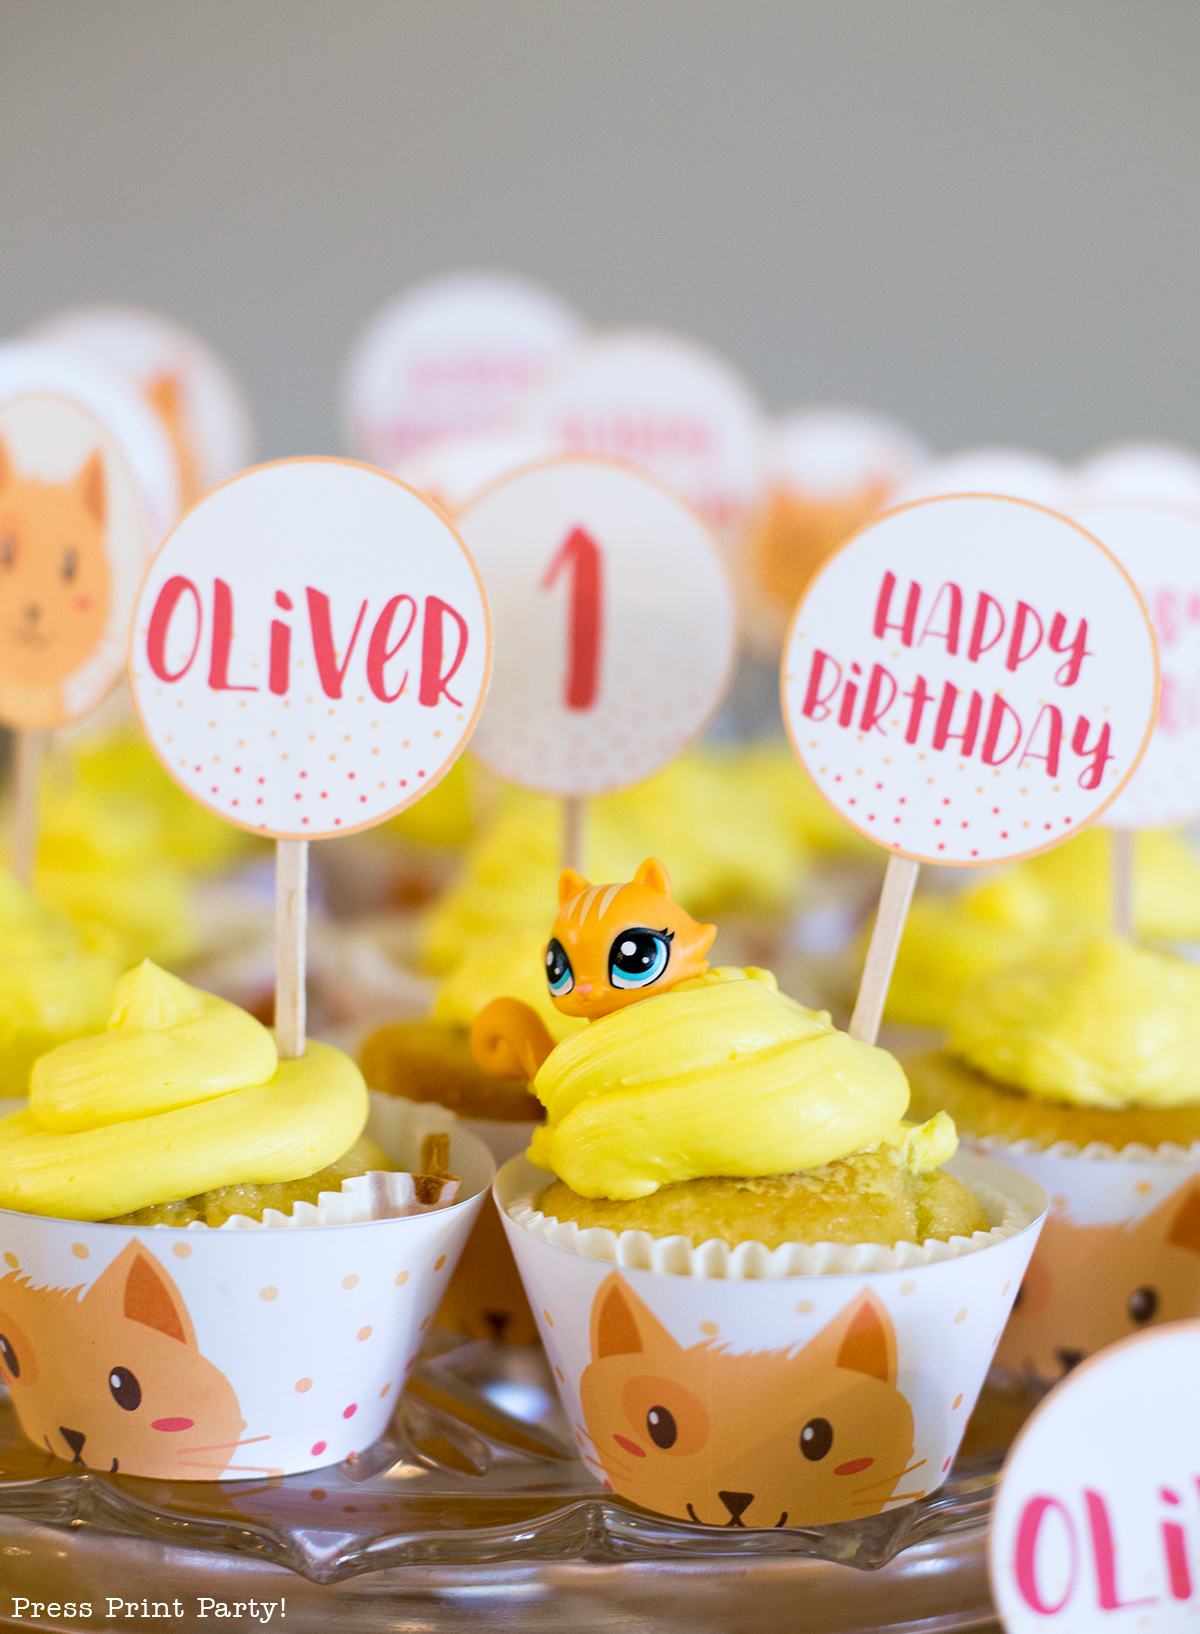 Tabby Cat Party Decorations and Printables, Kitty Party, Cat theme birthday party by Press Print Party! 